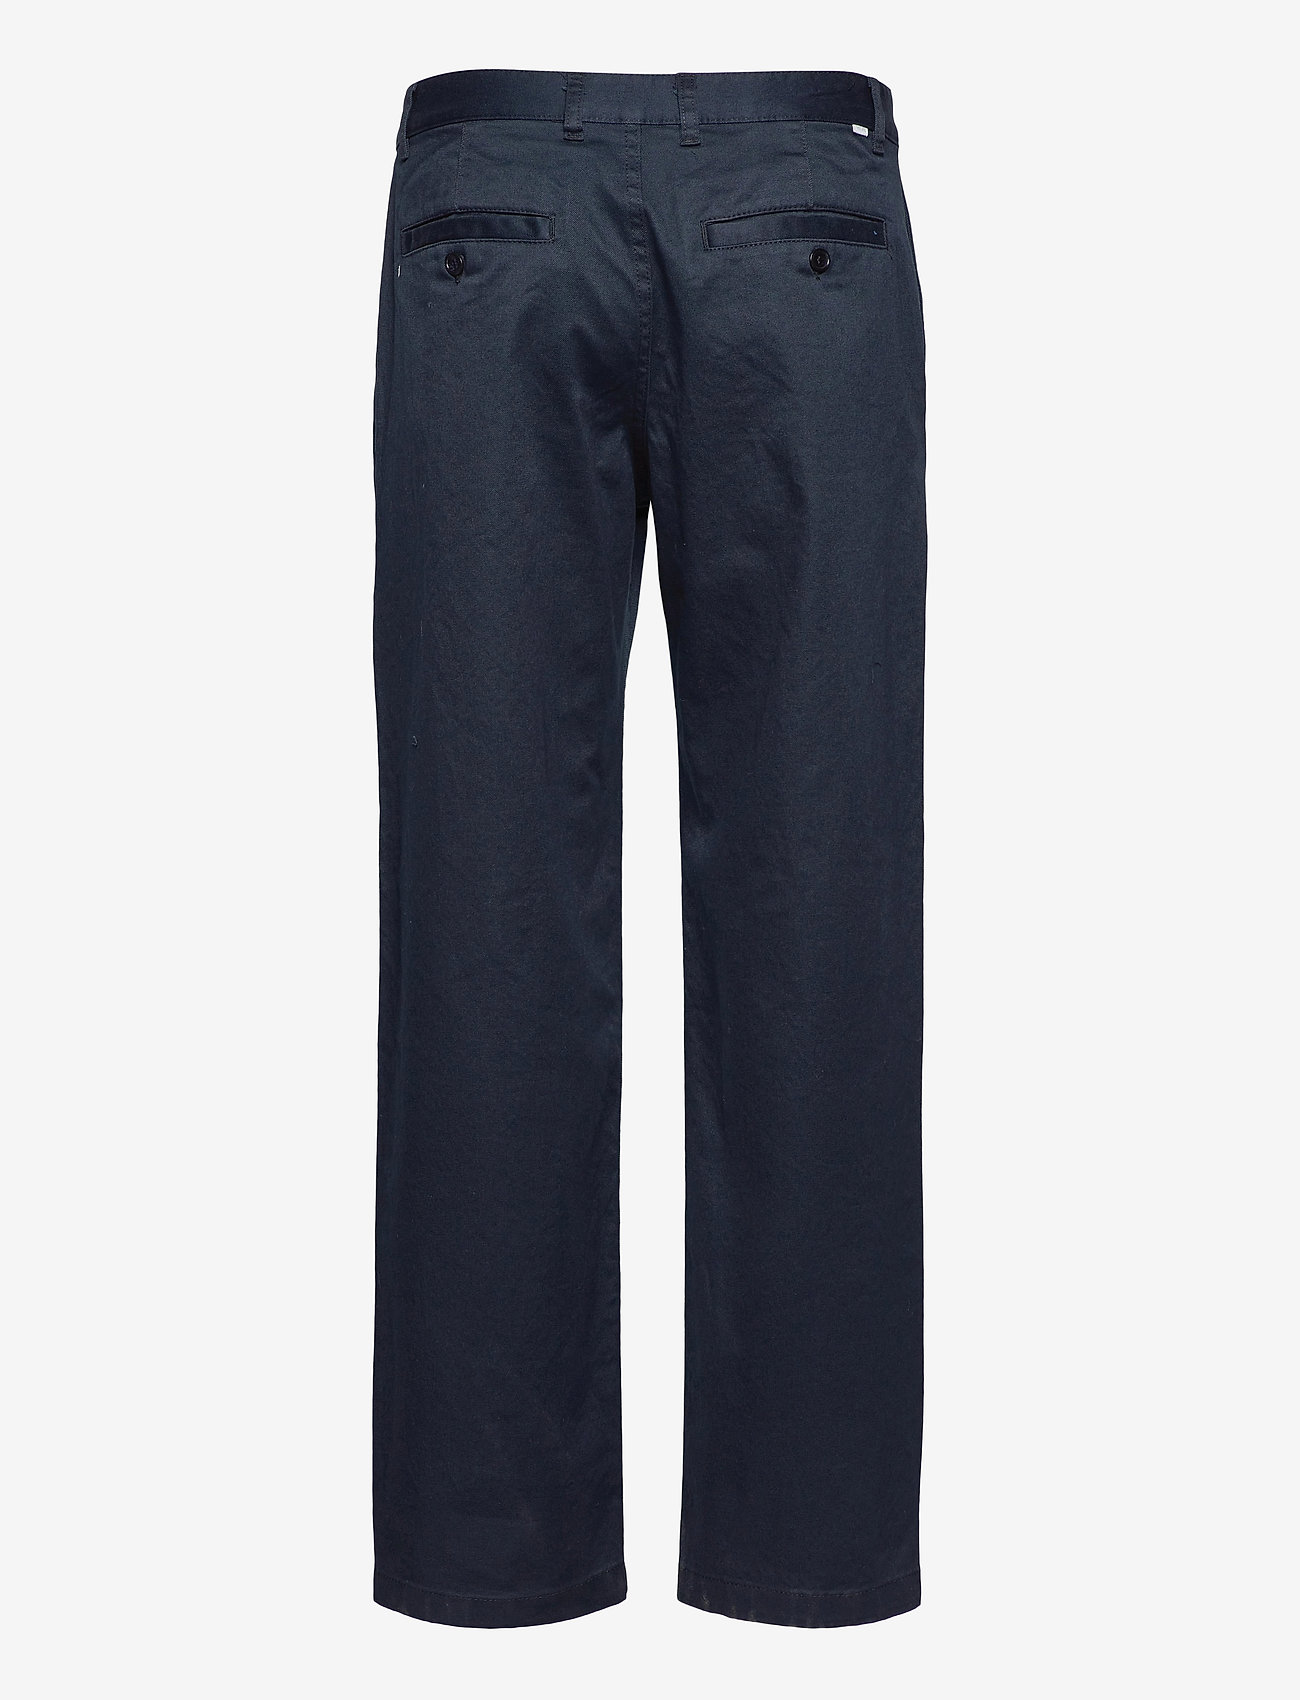 Wood Wood - Stefan classic trousers - chinos - black - 1